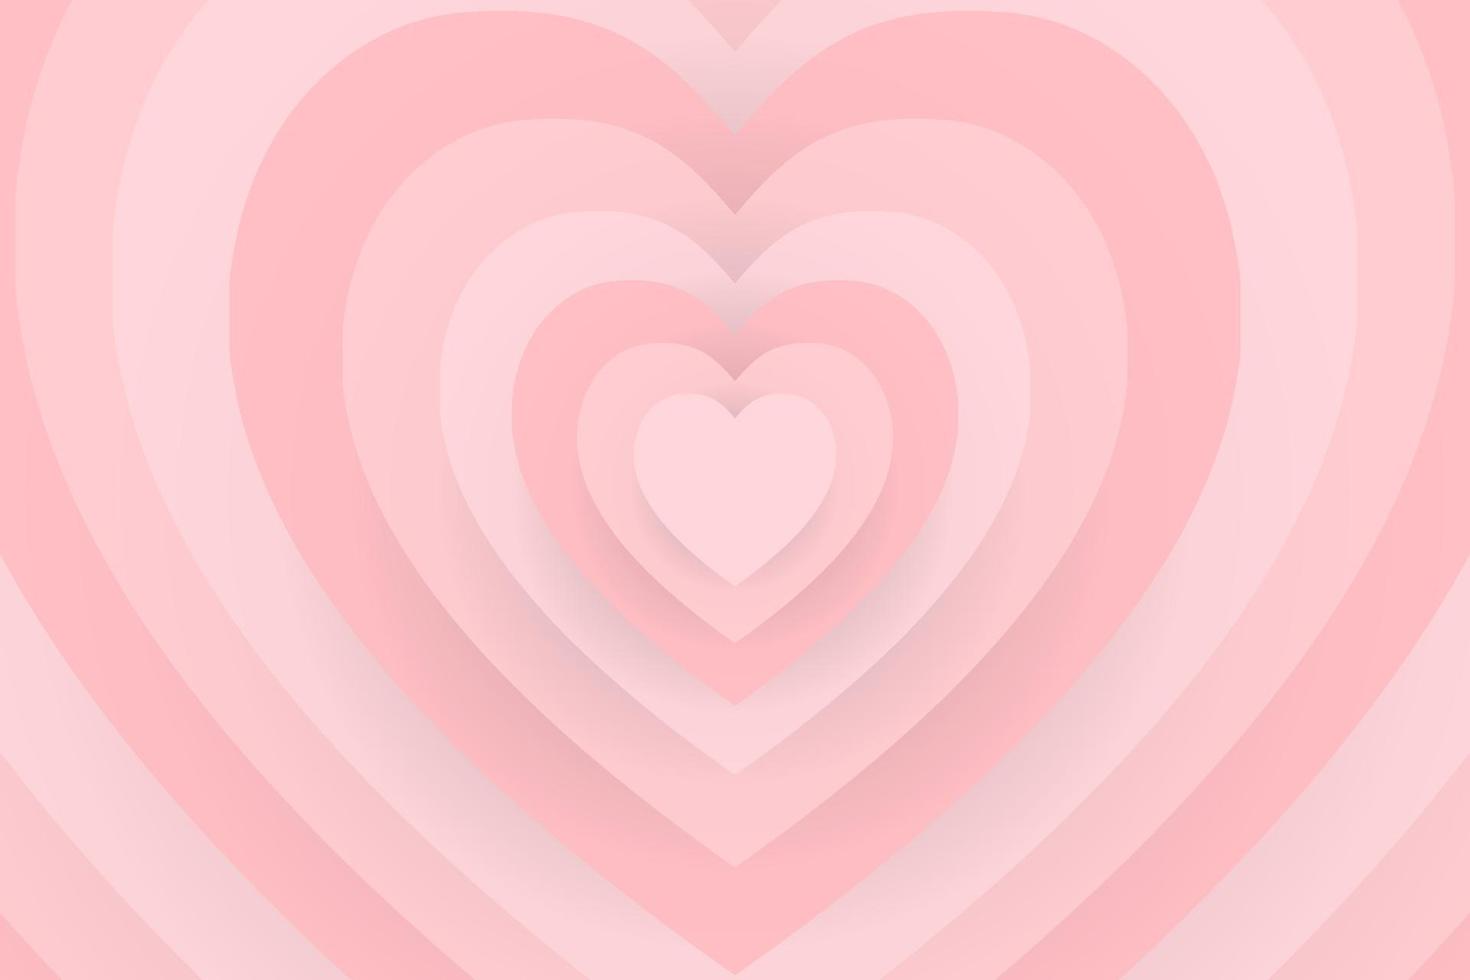 Vector illustration pink heart striped pattern 3d shape shell style,Heart love abstract